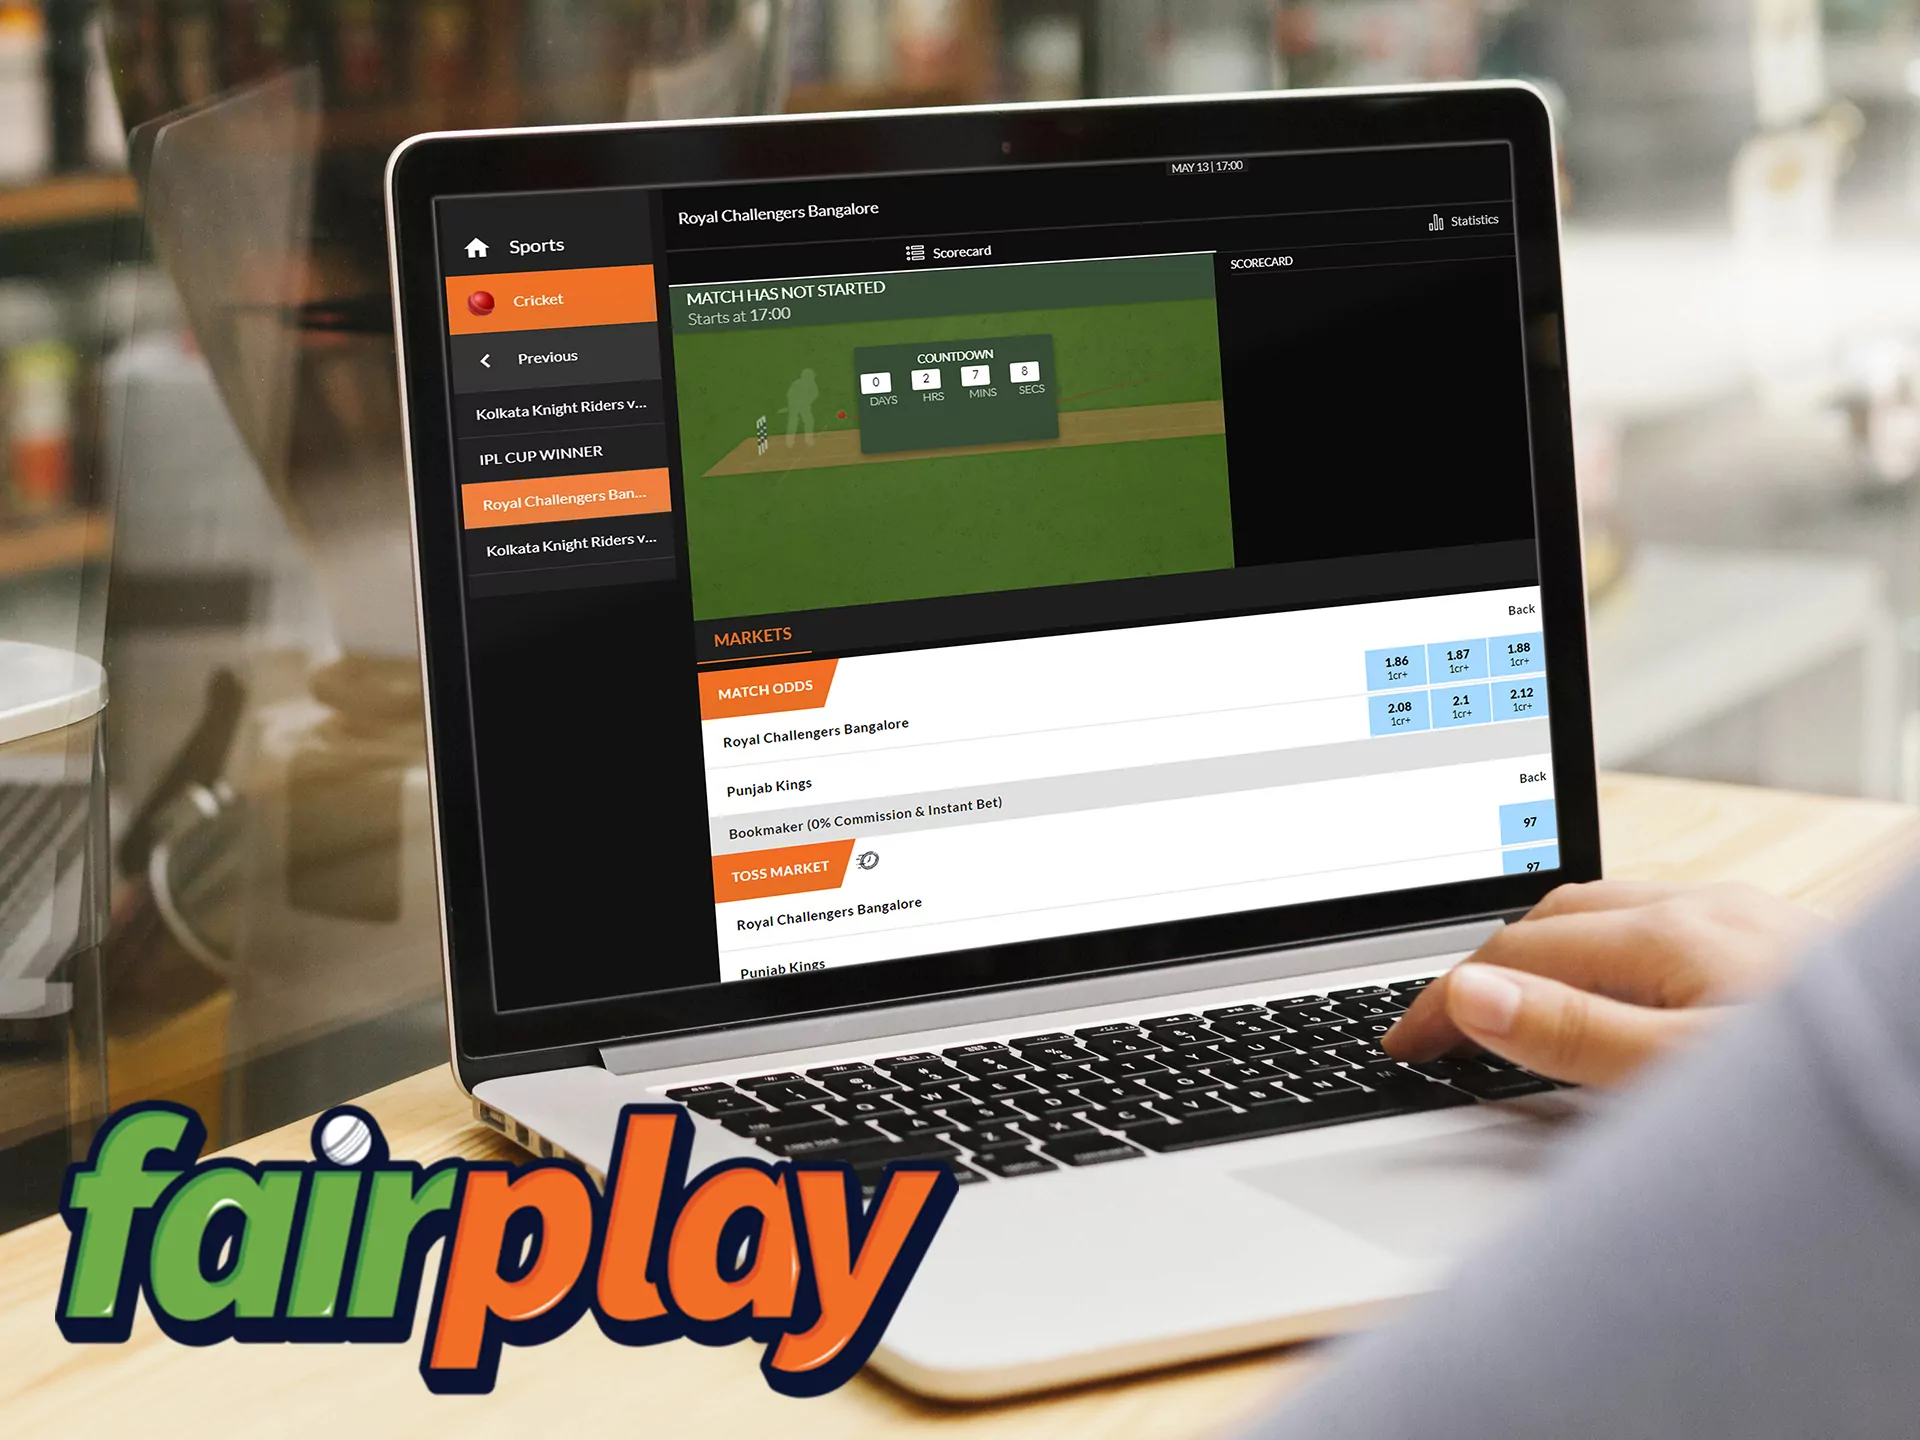 Sign in for your Fairplay account and place a bet.